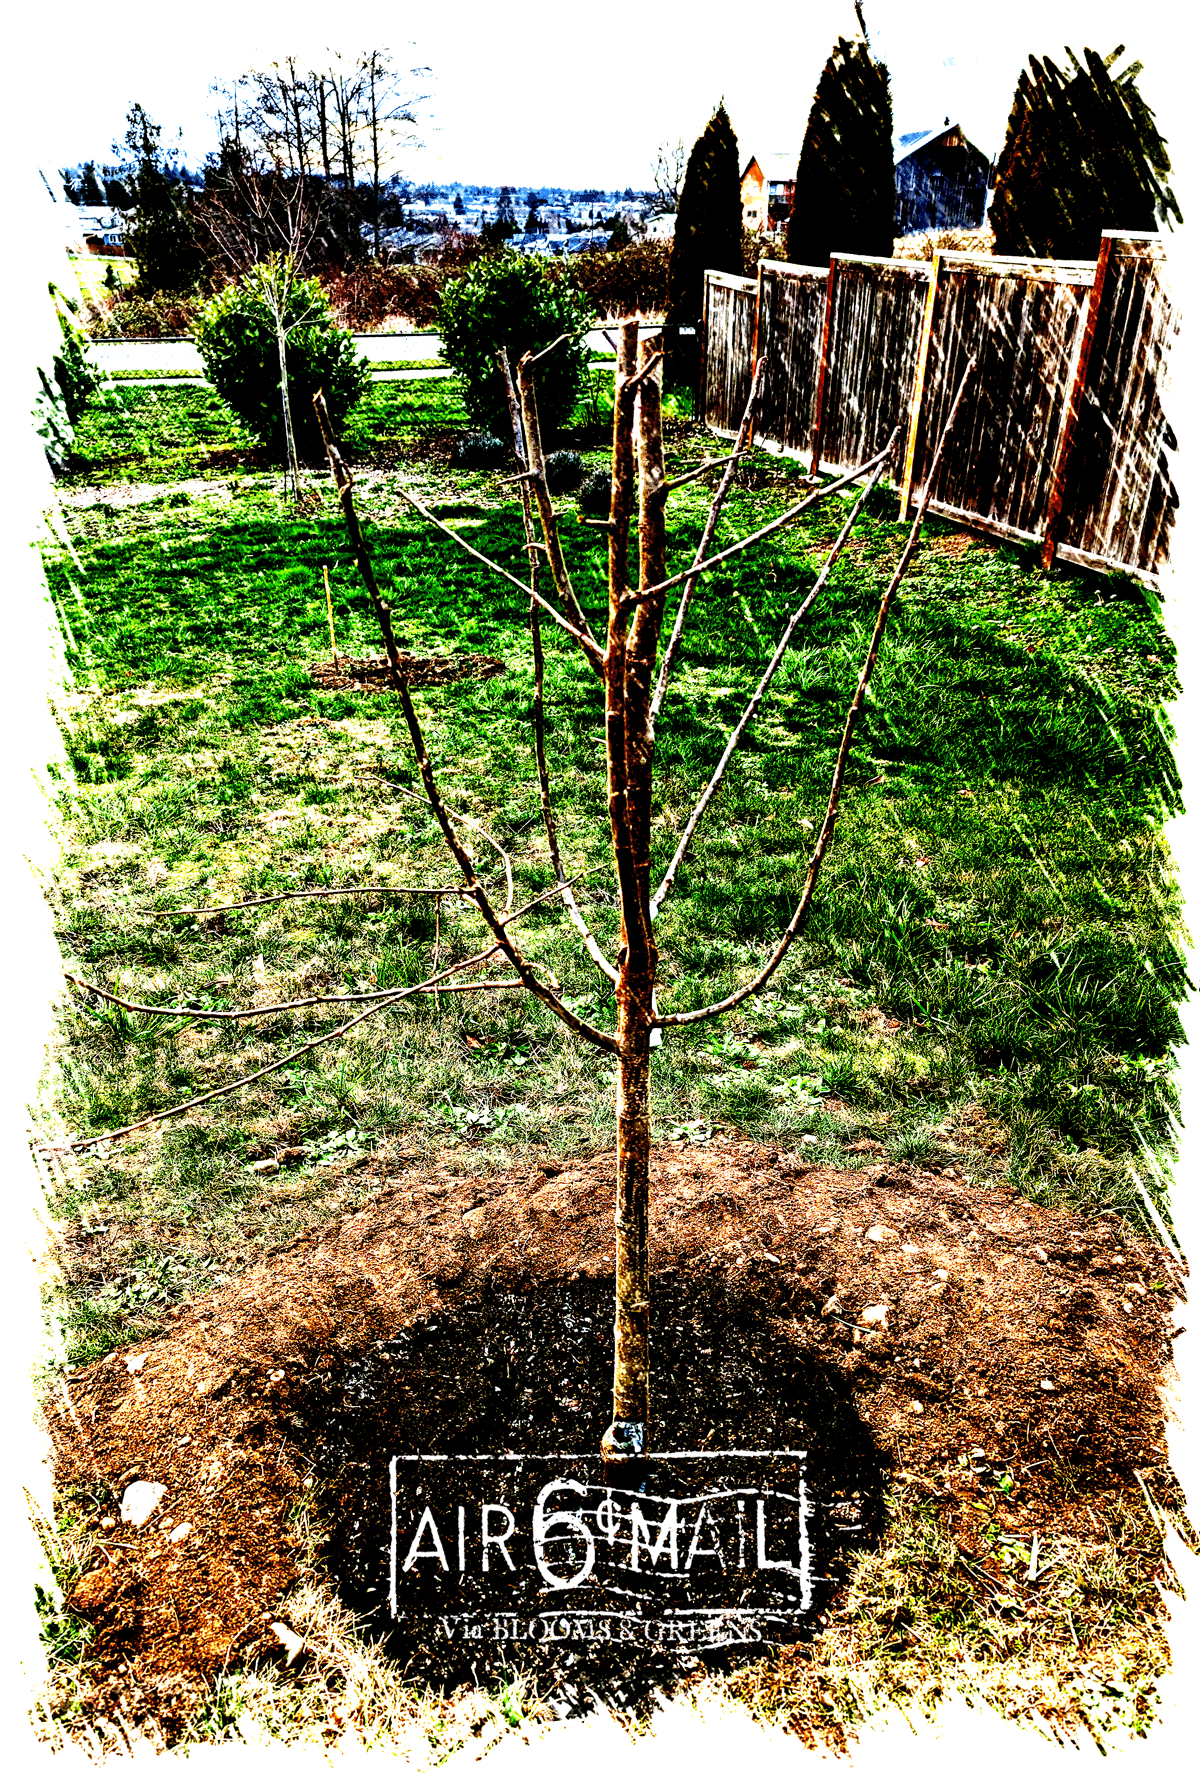 Victoria and d'Ente Plums planted, February 17-18, 2023. B&G Photo